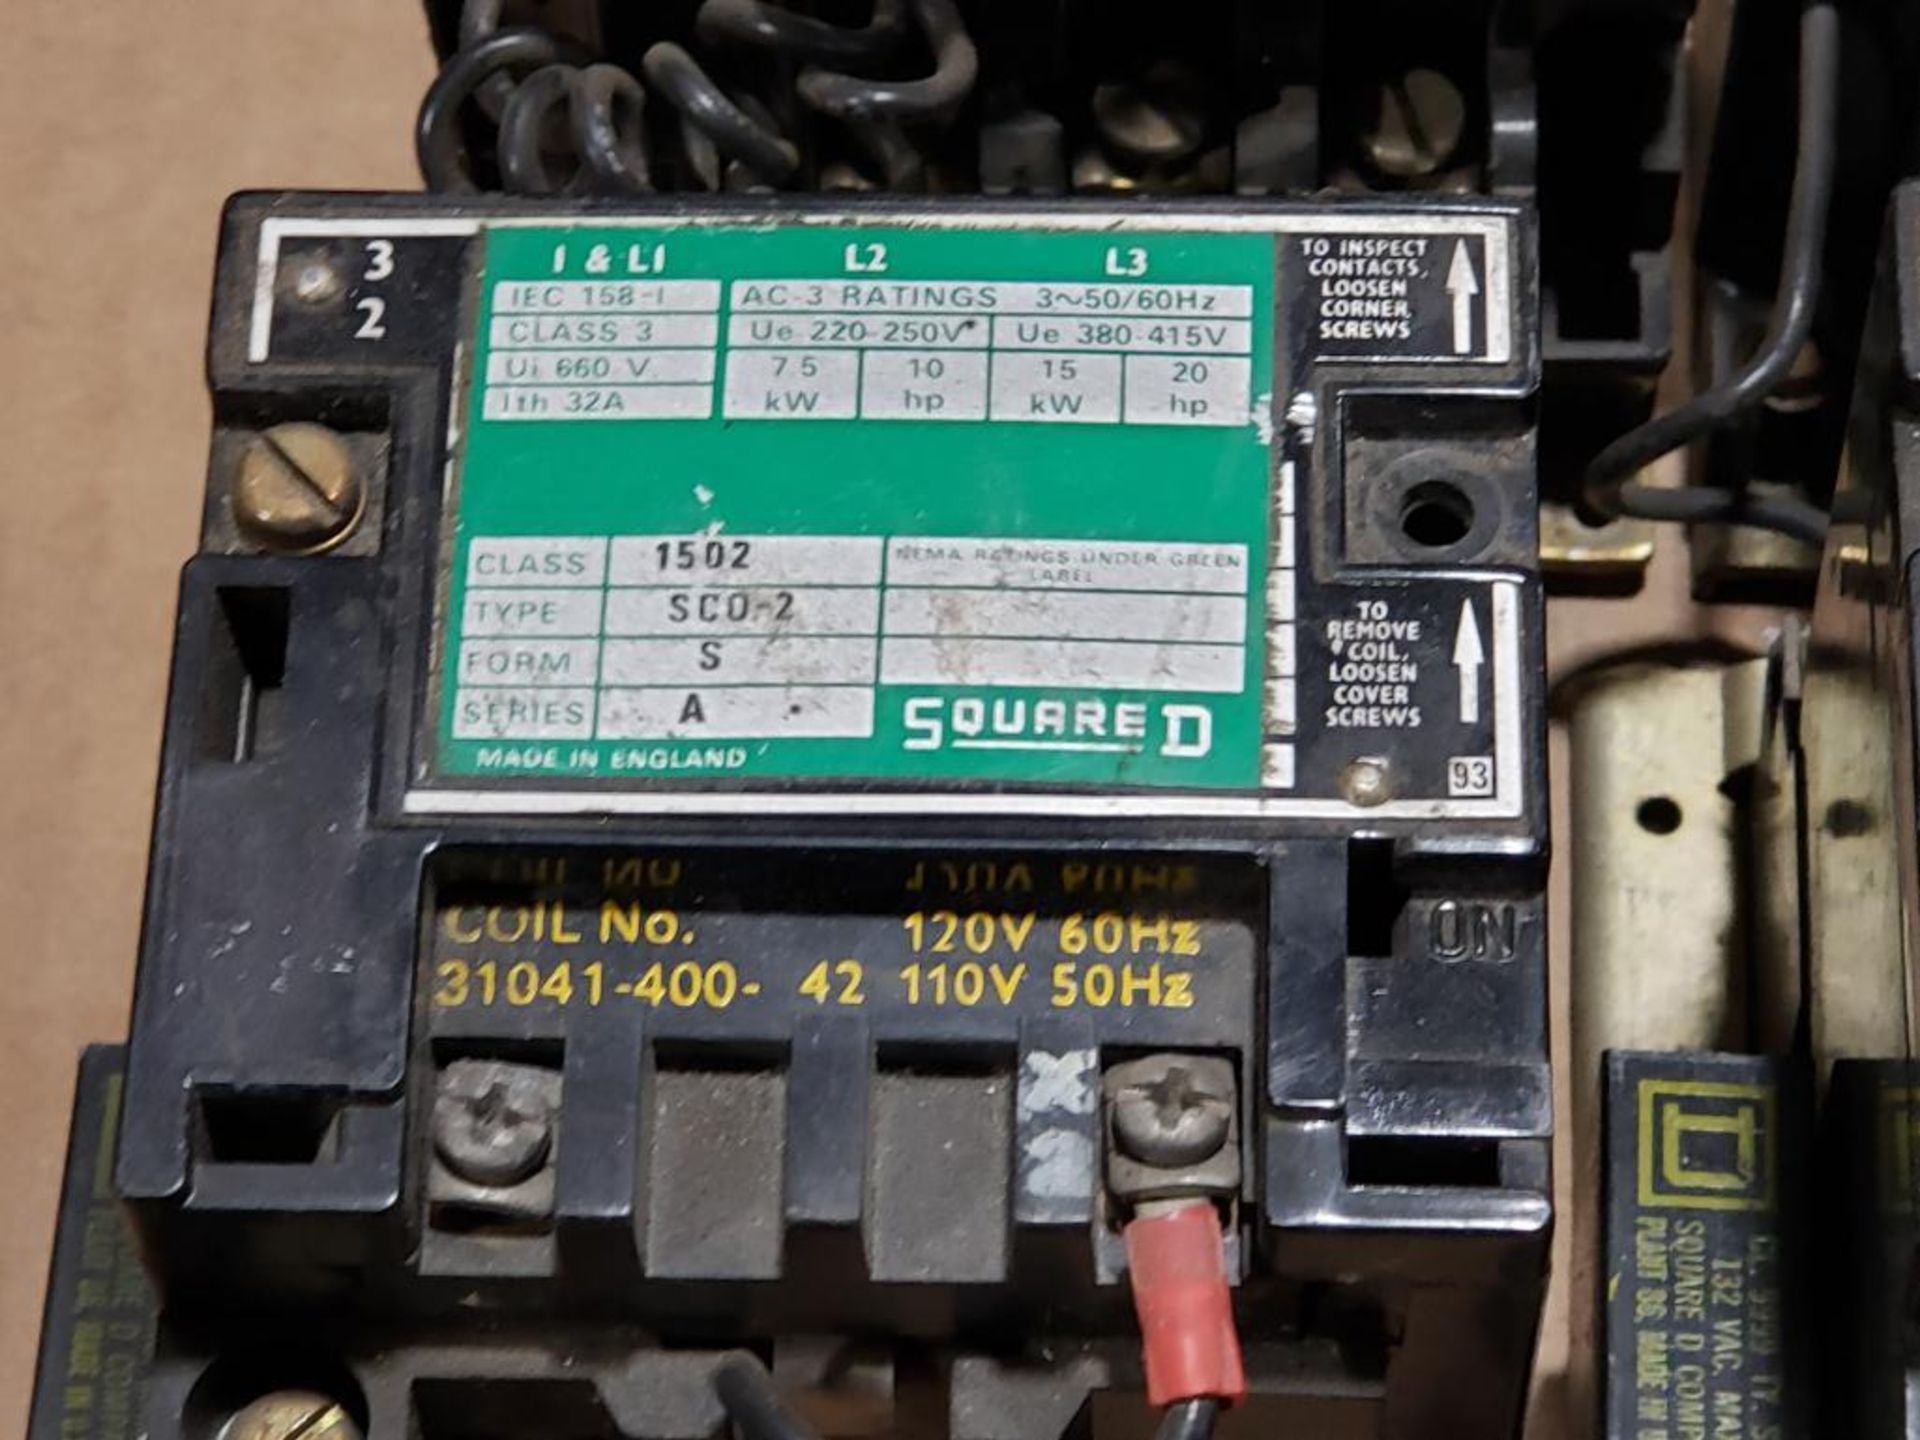 Qty 12 - Square D contactor. Class 1502 type SCO-2. - Image 10 of 14